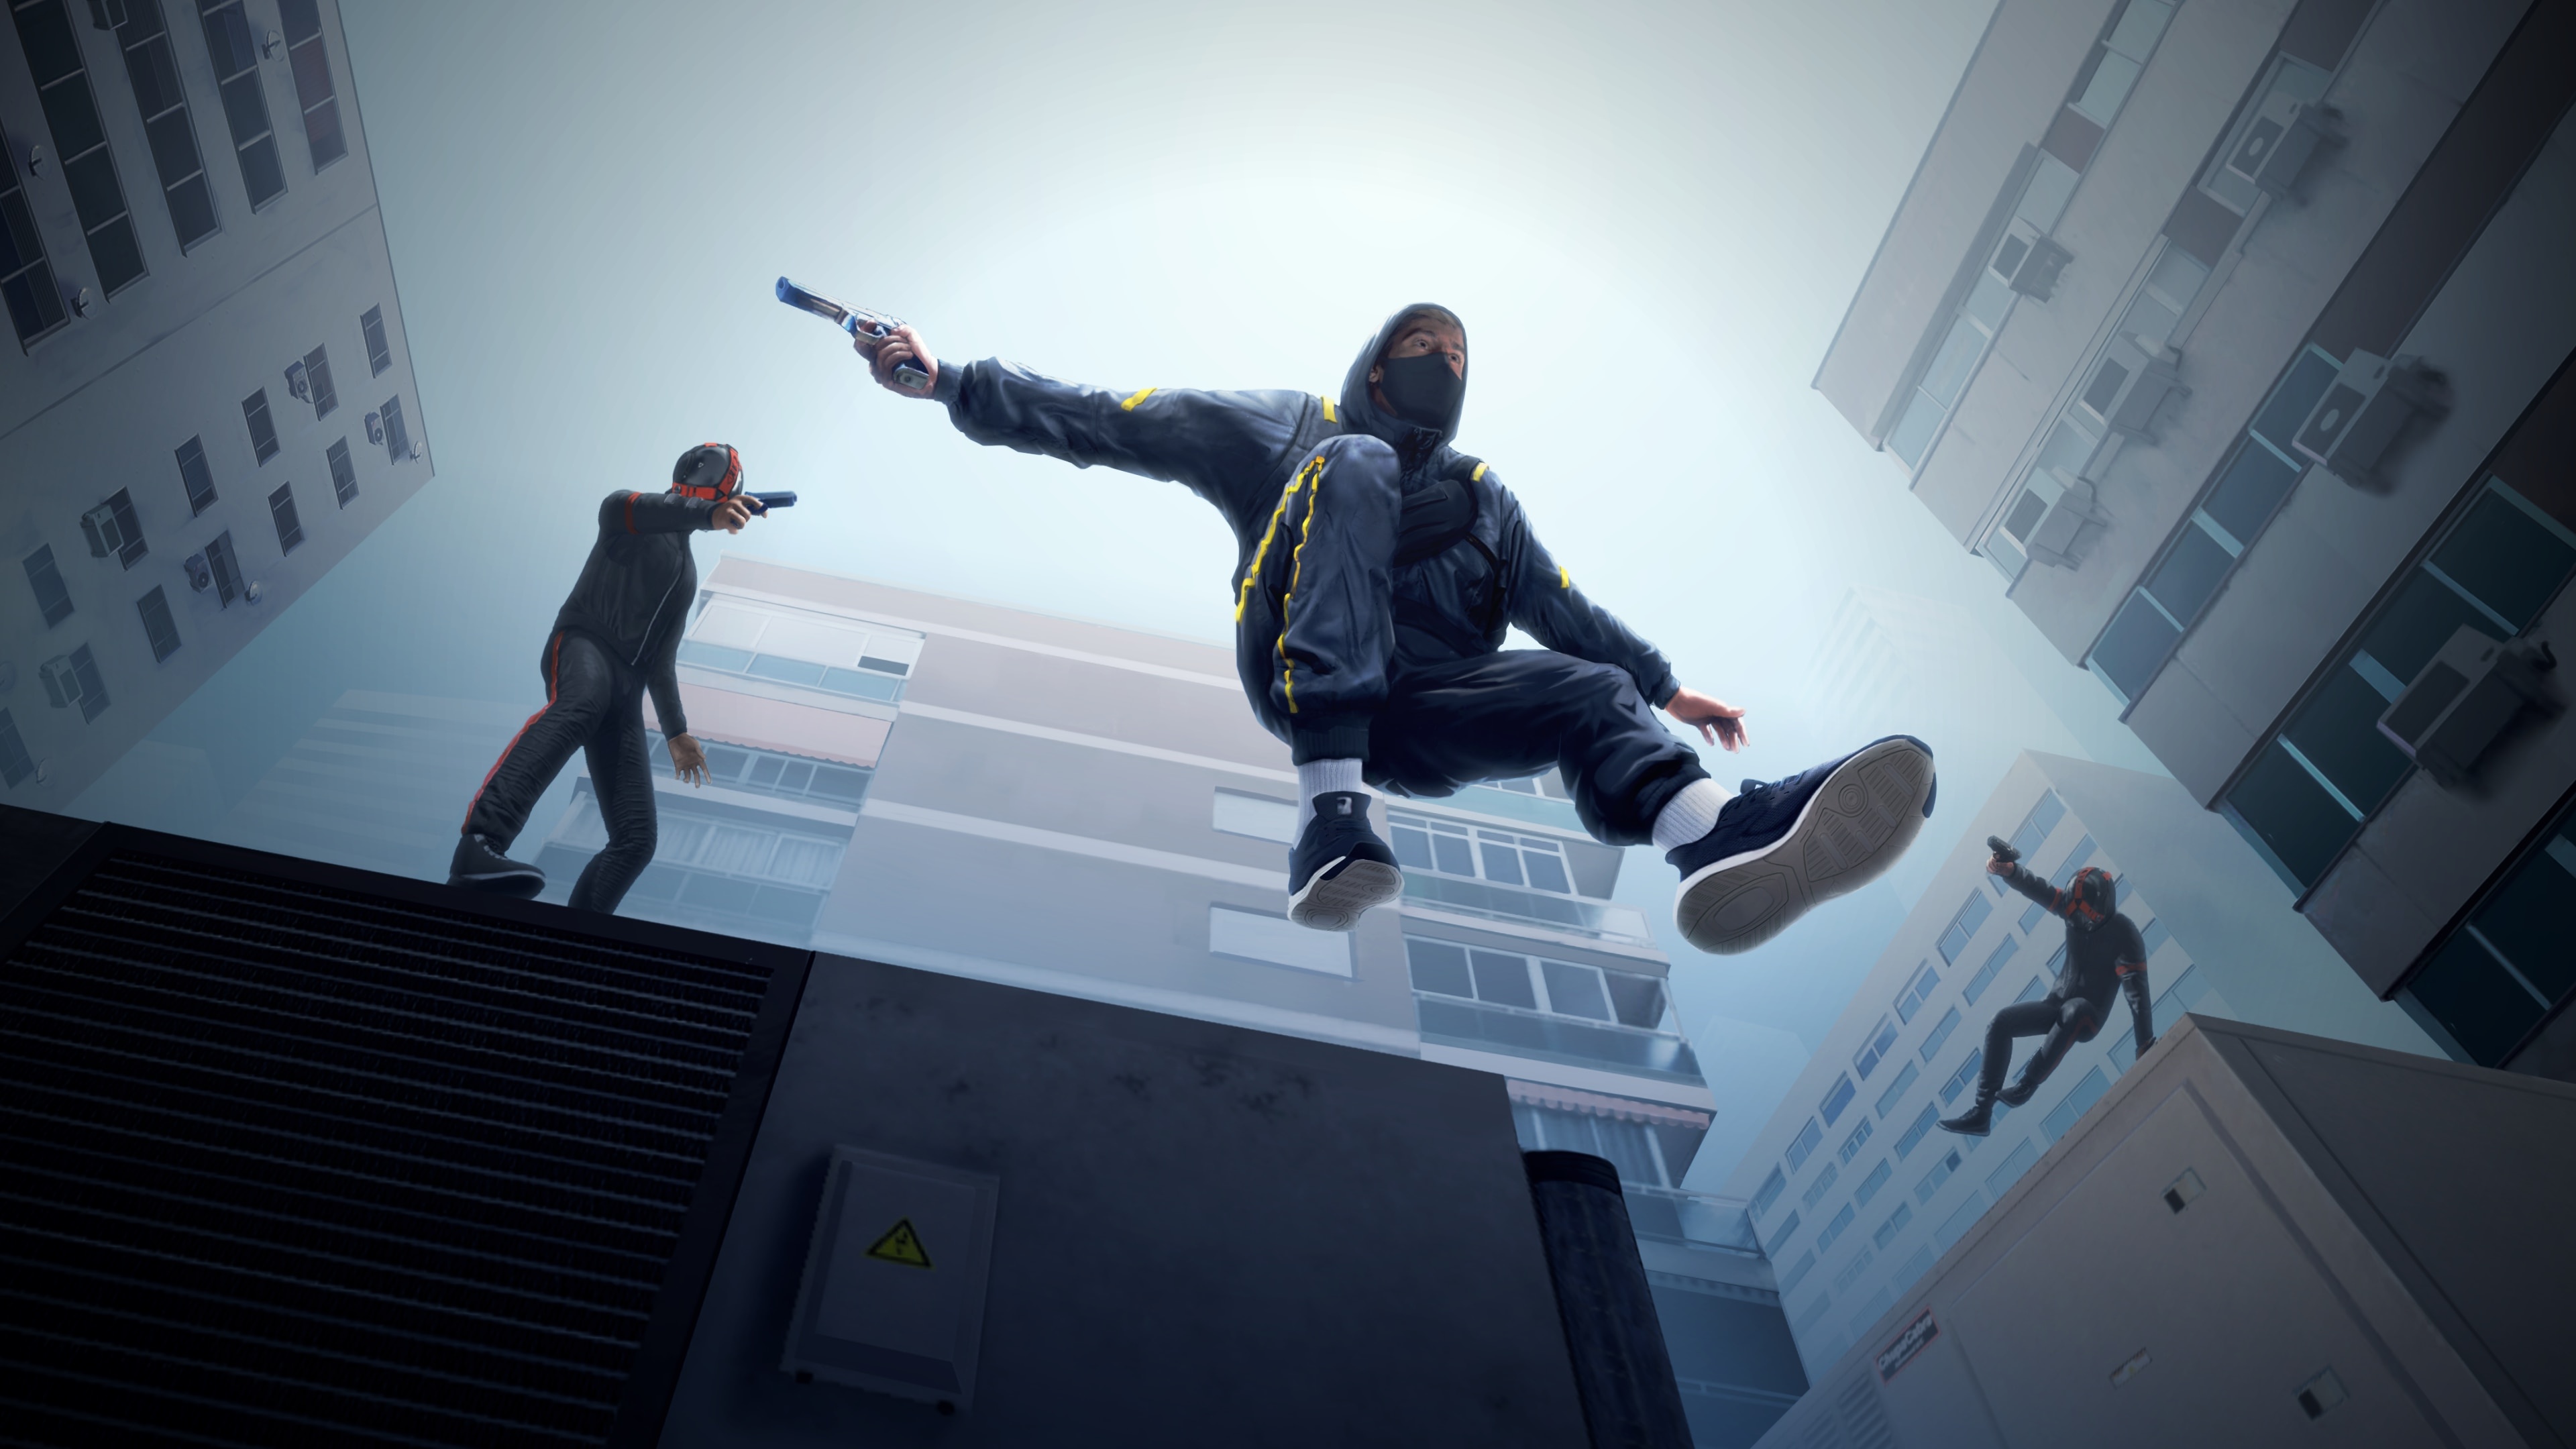 Parkour: Parkour chase with guns, Elements of military training, Action and sport. 3840x2160 4K Wallpaper.